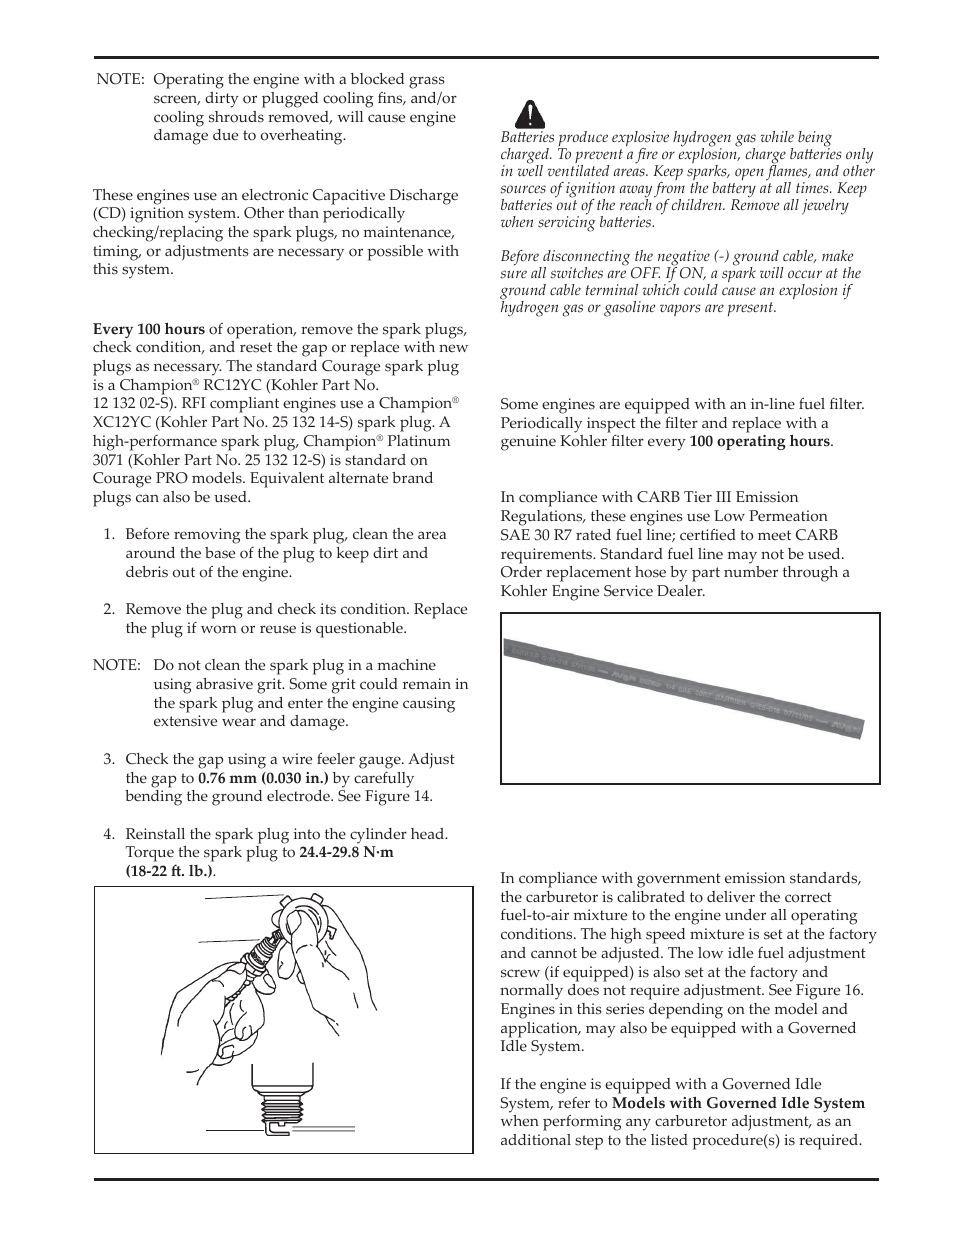 Kohler Courage SV720 User Manual | Page 11 / 20 | Also for: Courage PRO